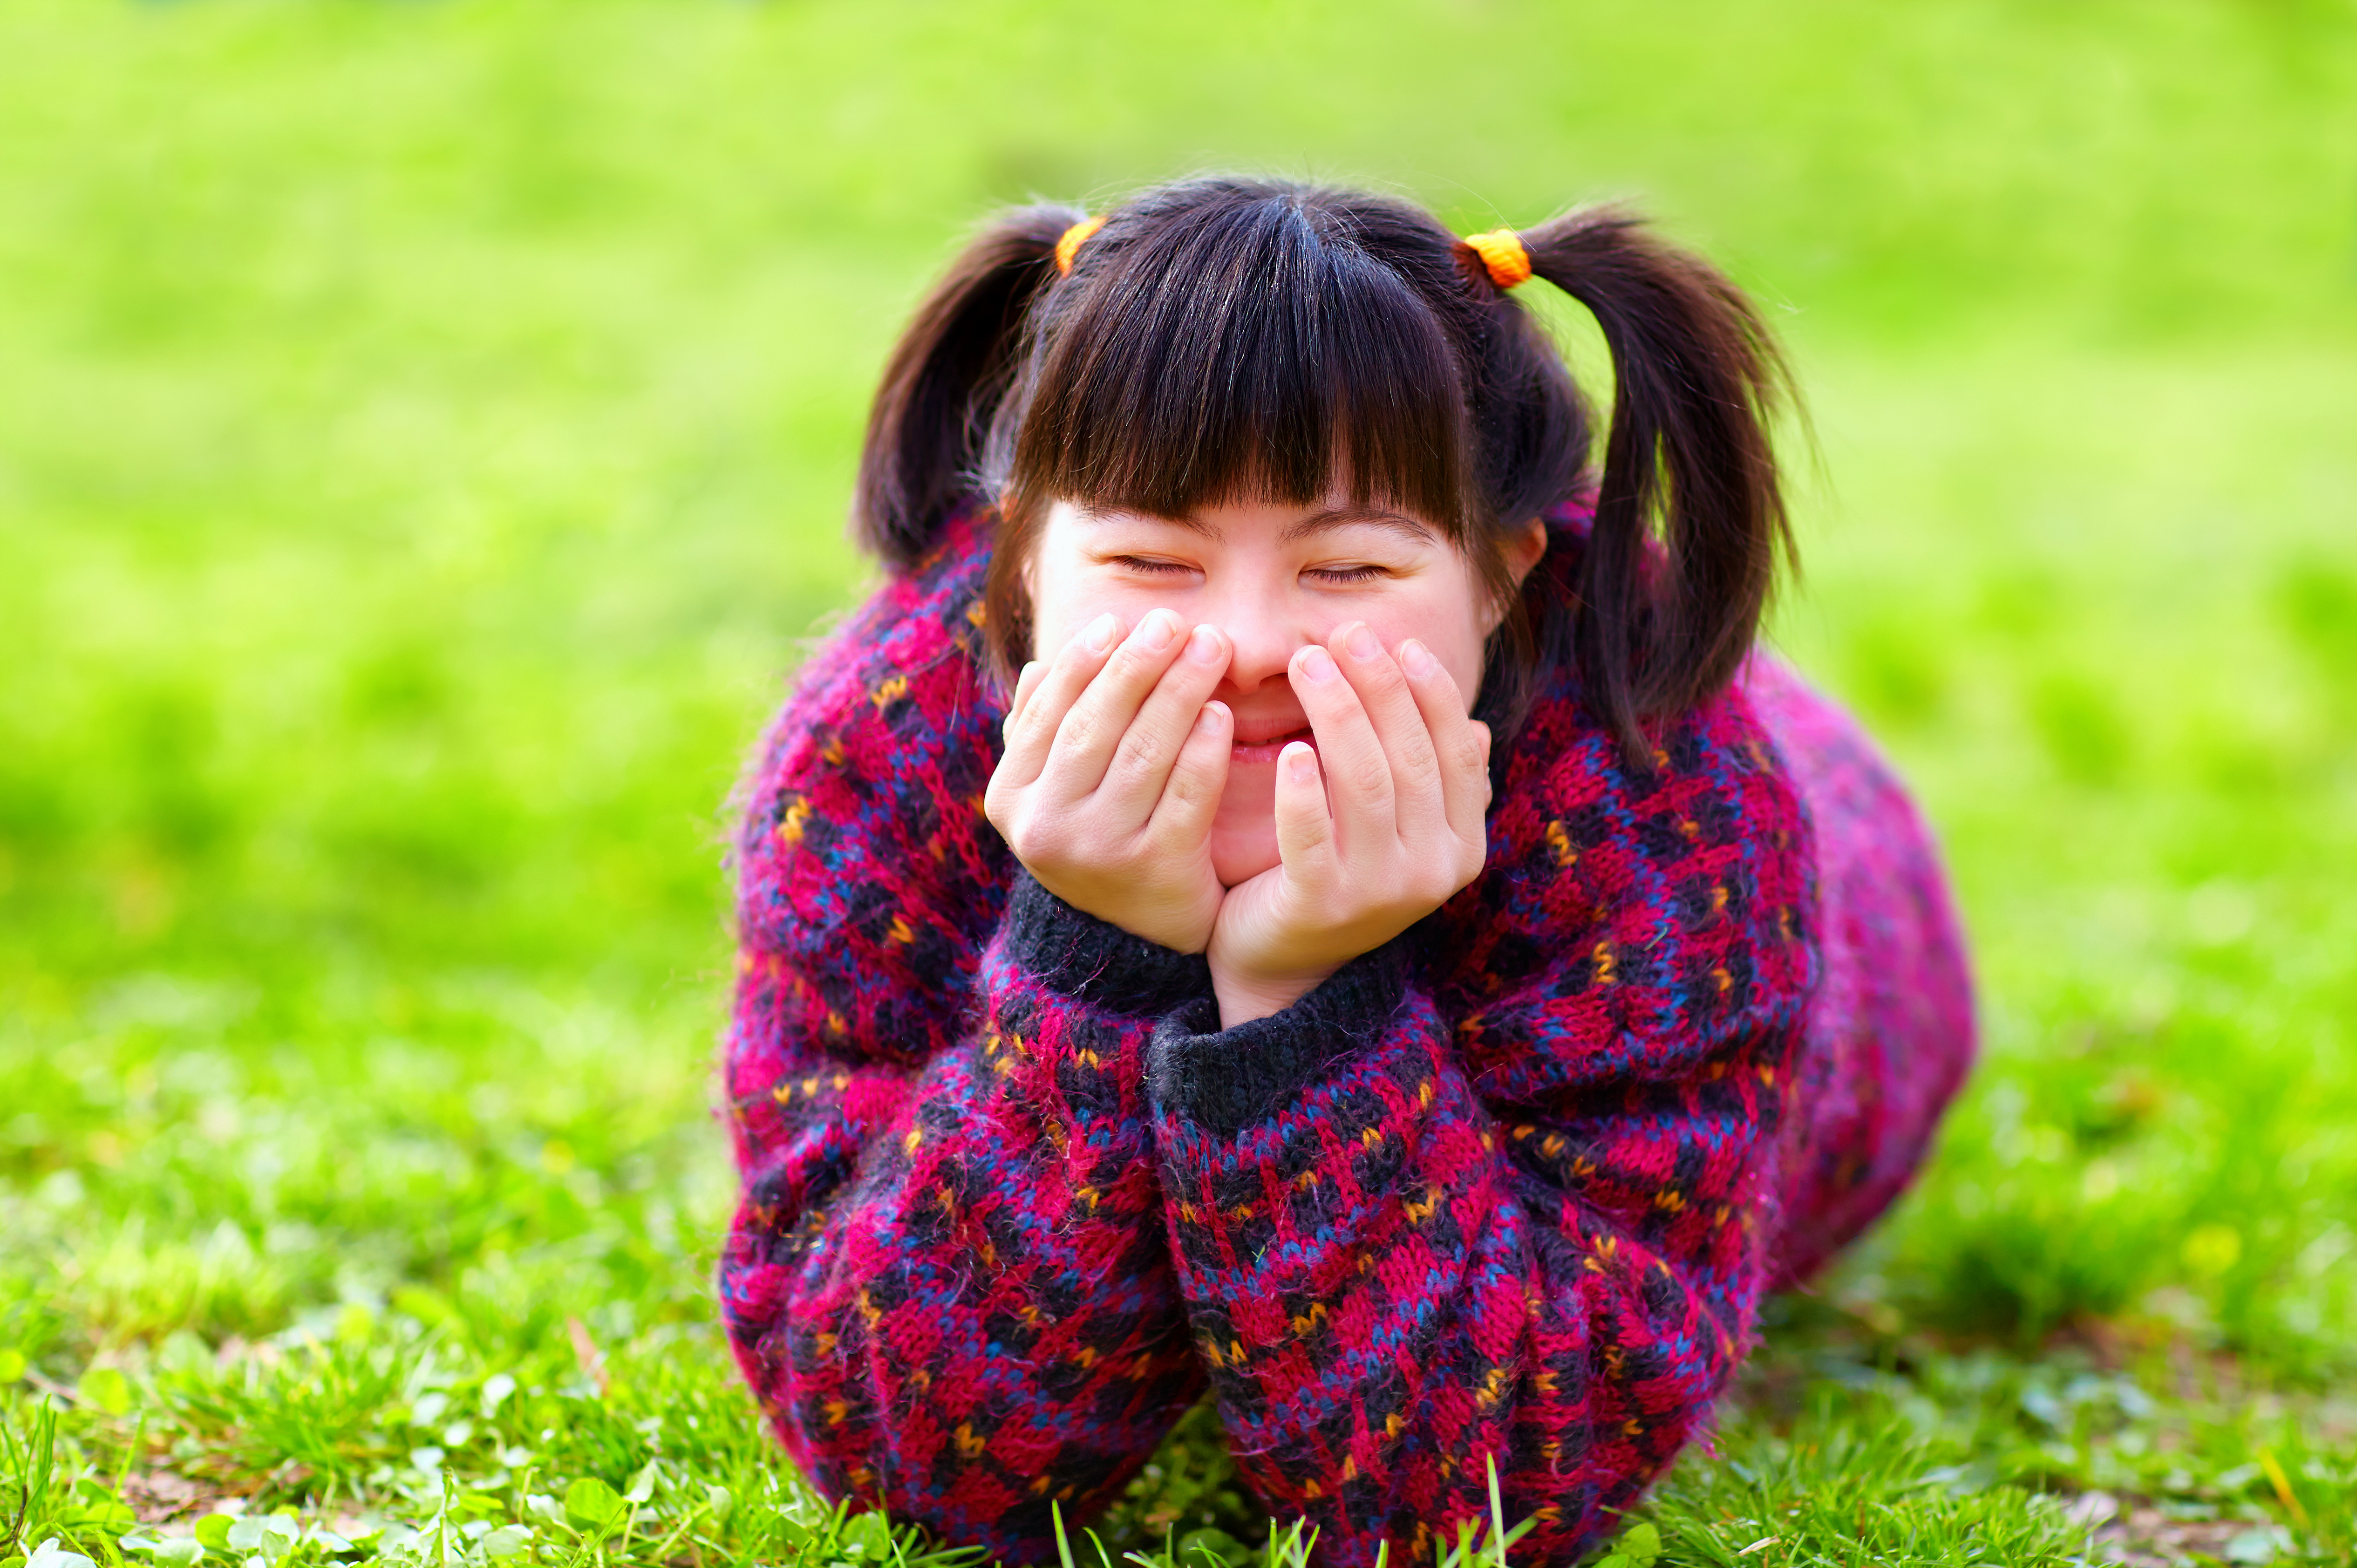 young girl with a disability lying on grass smiling 